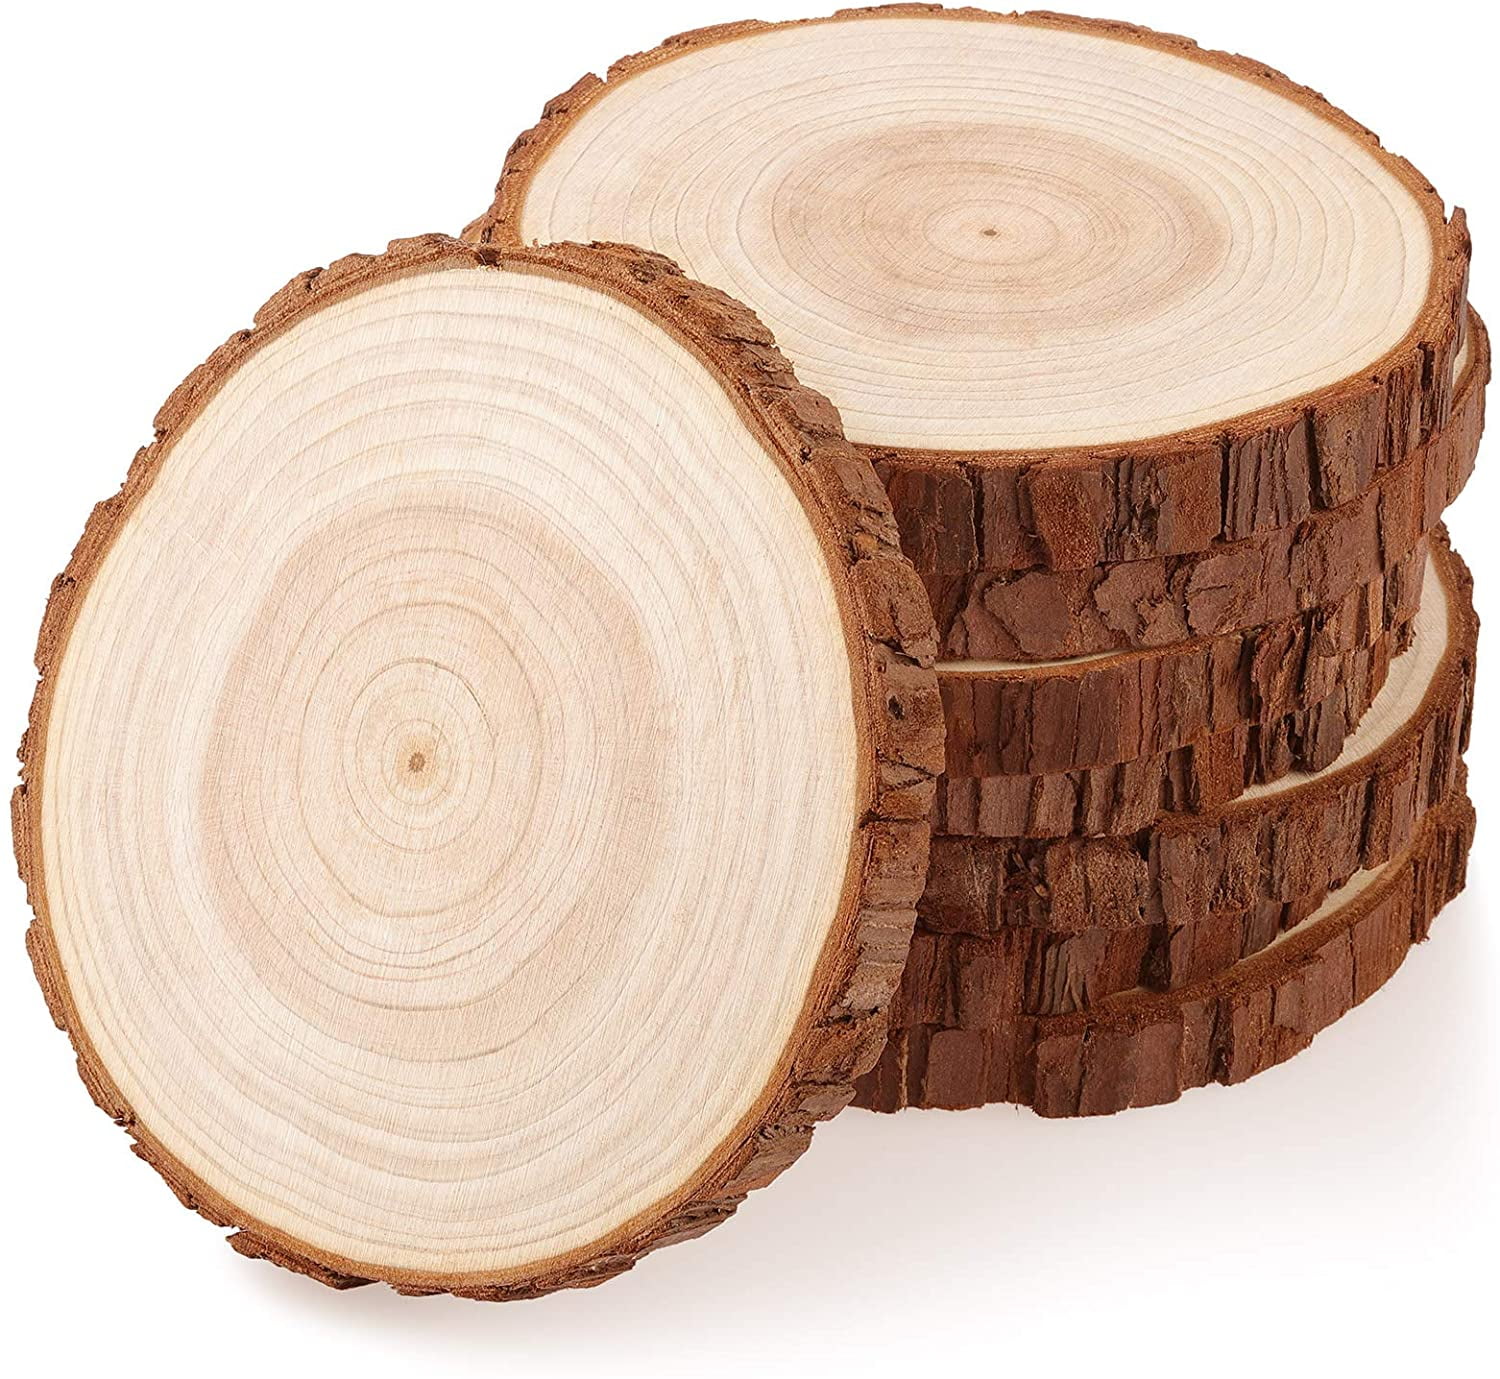 Fuyit Wood Slices 30 Pcs 7-8cm NO Hole Natural Unfinished Log Wooden Circles for 